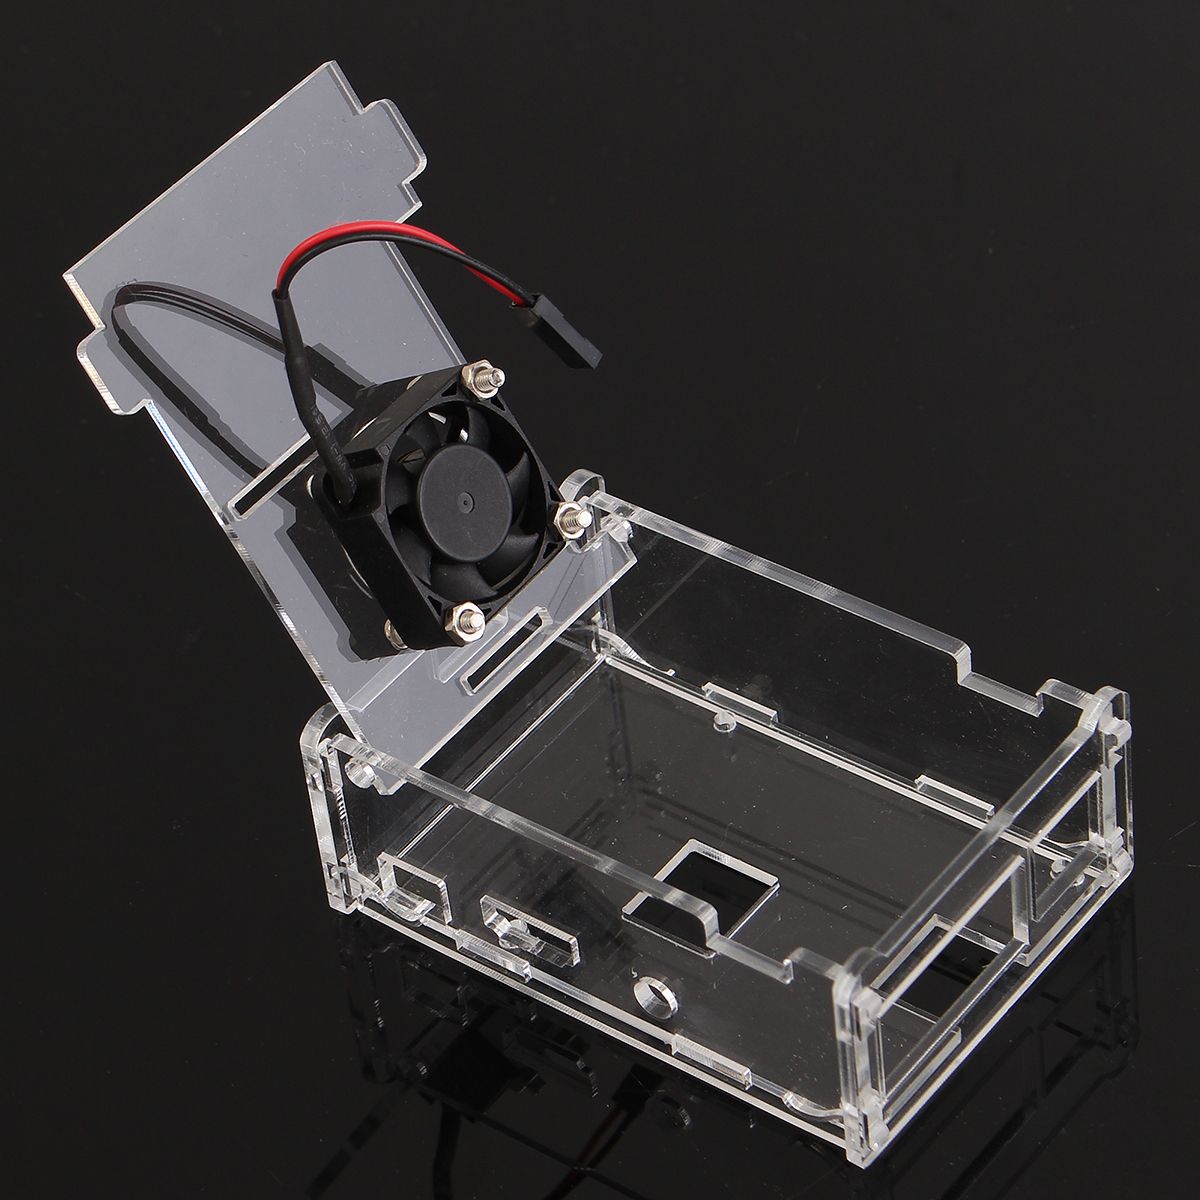 Transparent-Acrylic-Case-Shell-Enclosure-Box-with-Fan-For-Raspberry-Pi-3B2BB-1145104